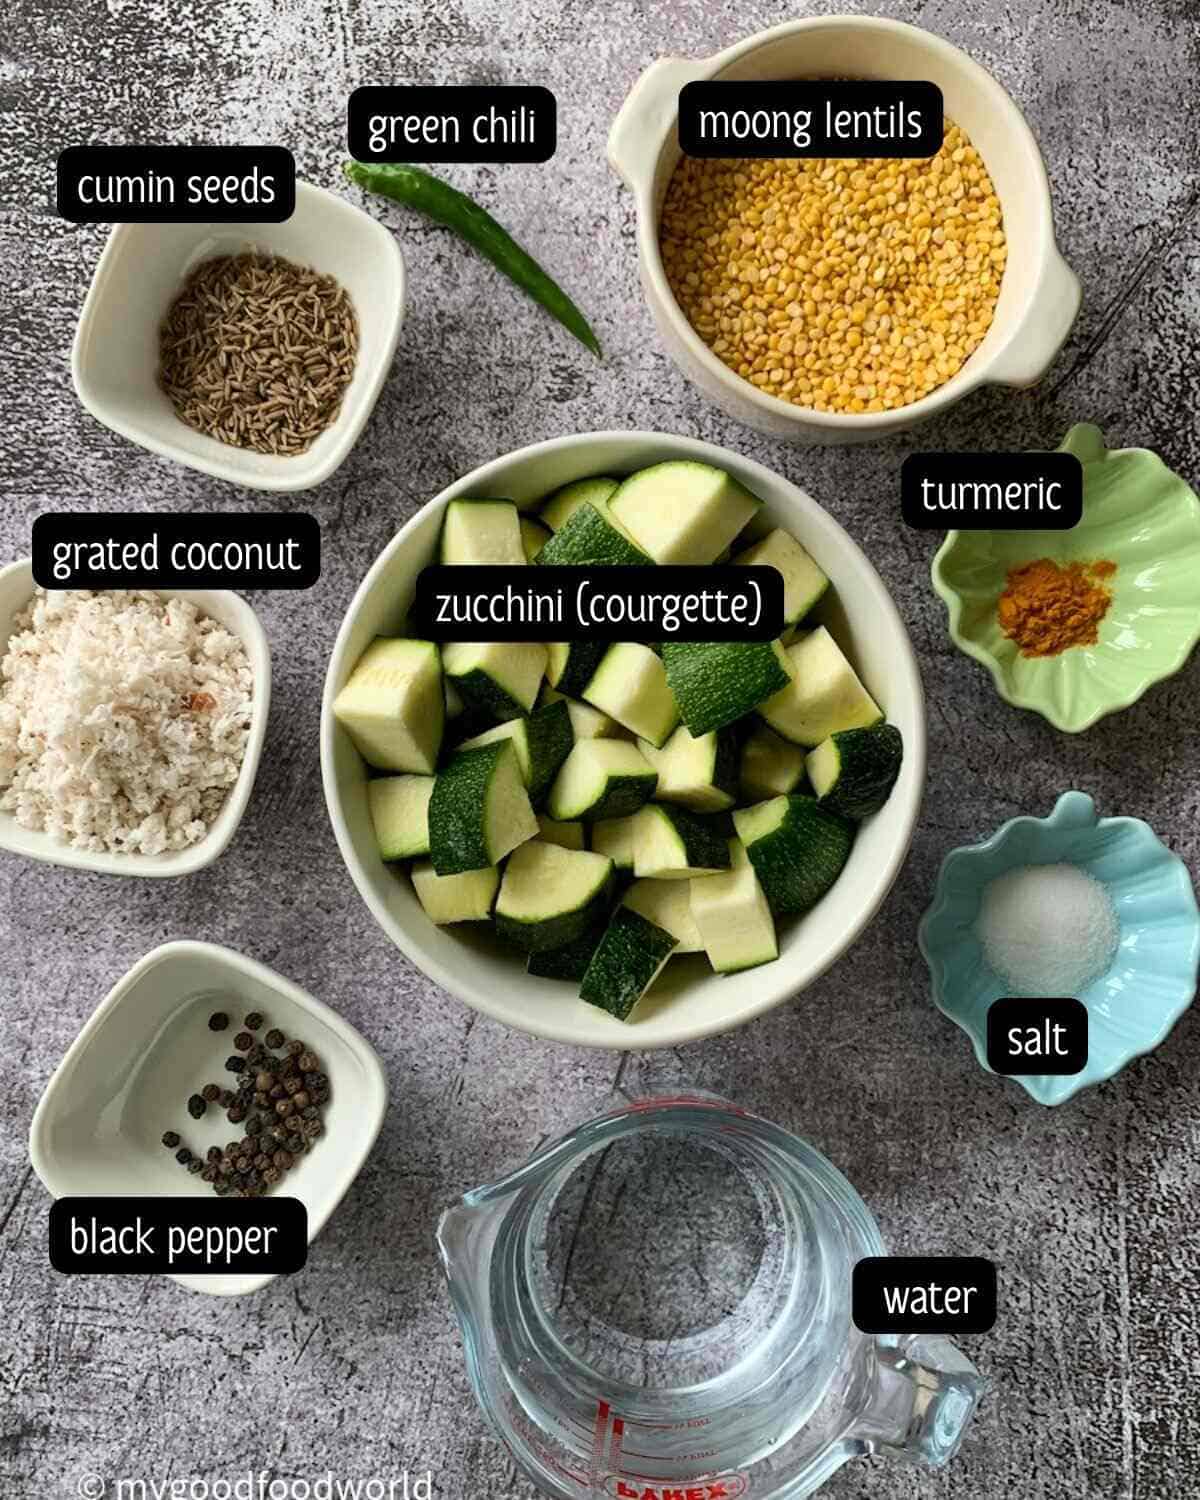 Ingredients for the zucchini kootu recipe are placed in small bowls and arranged on a dark grey and white patterned background.